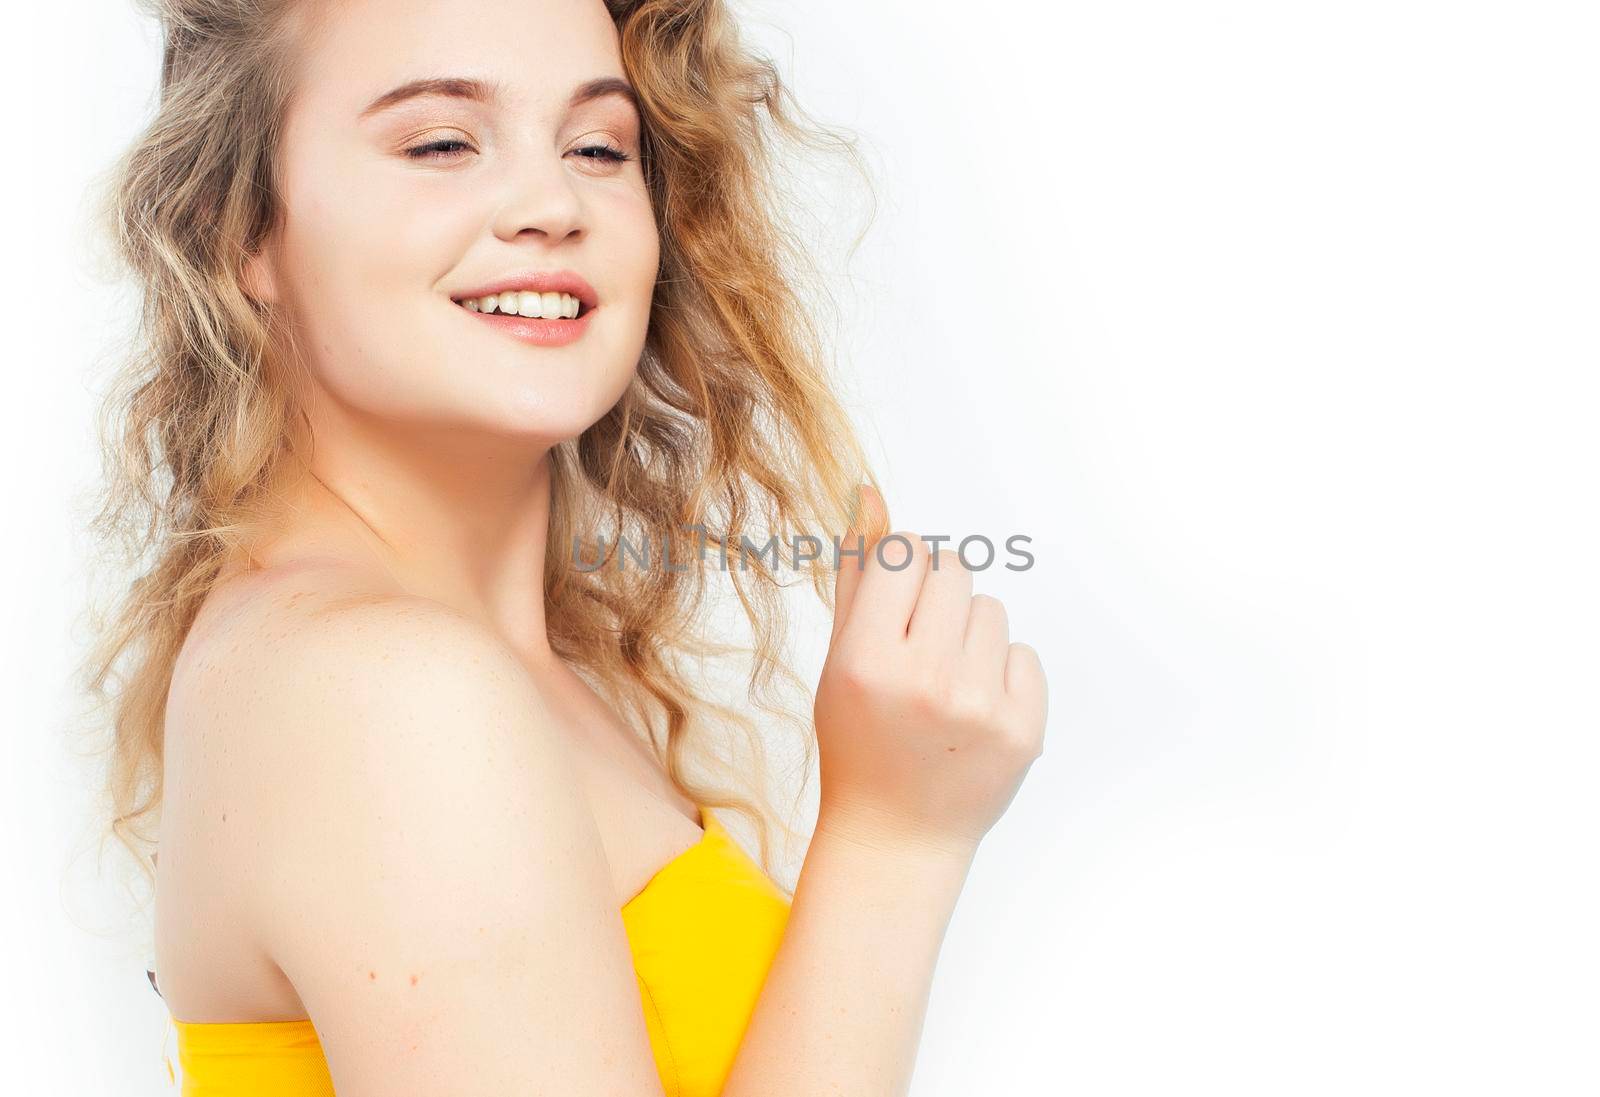 oung pretty blond girl posing happy smiling on white background isolated, lifestyle people concept close up